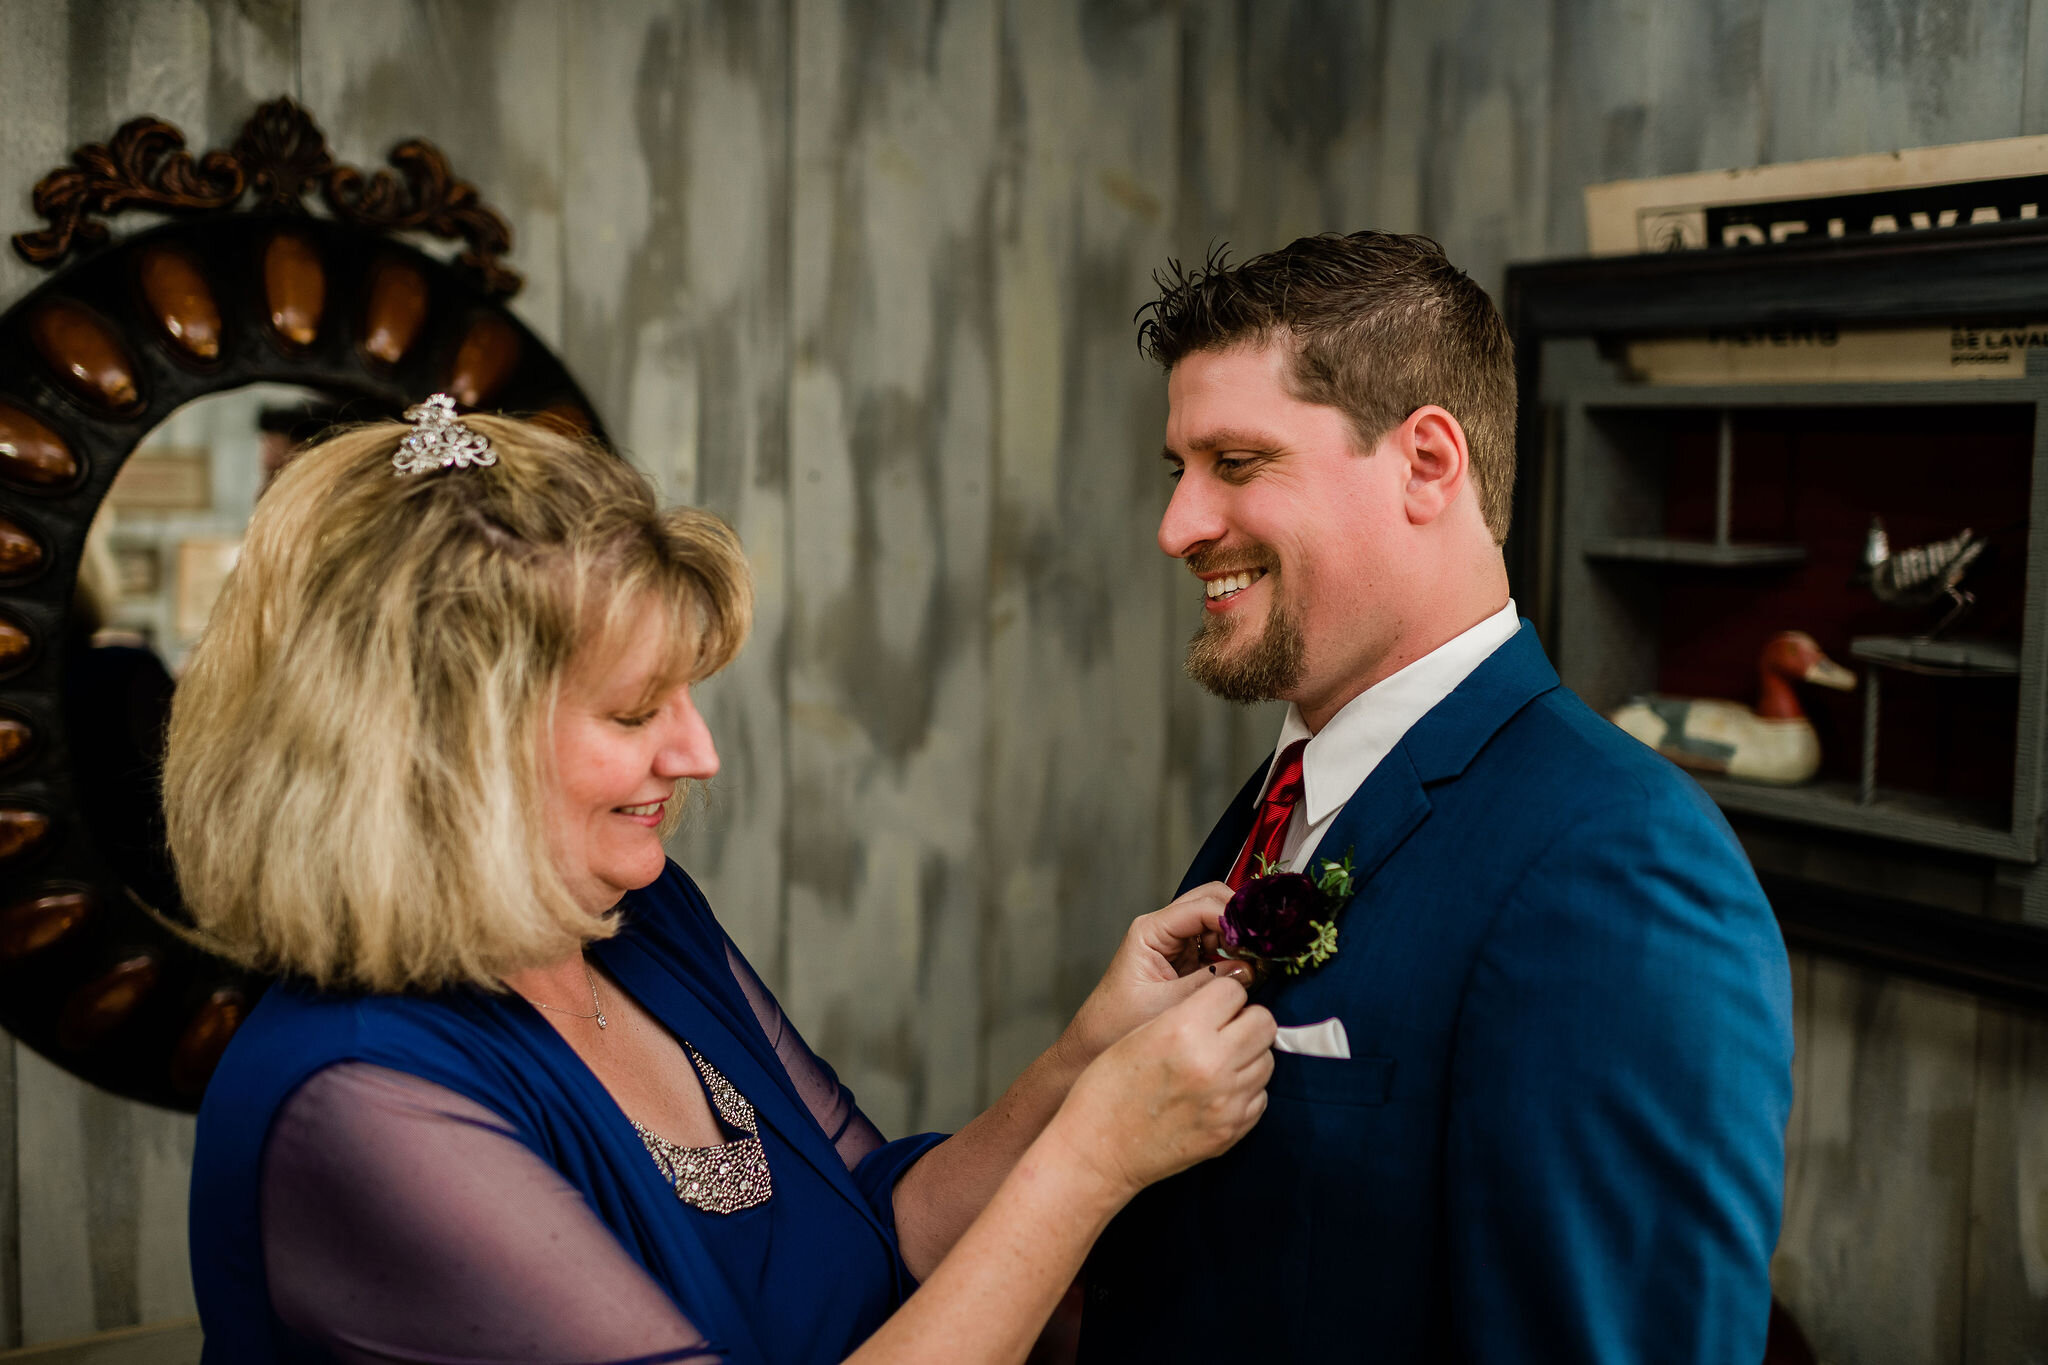 Groom's mom pinning his boutonniere on him